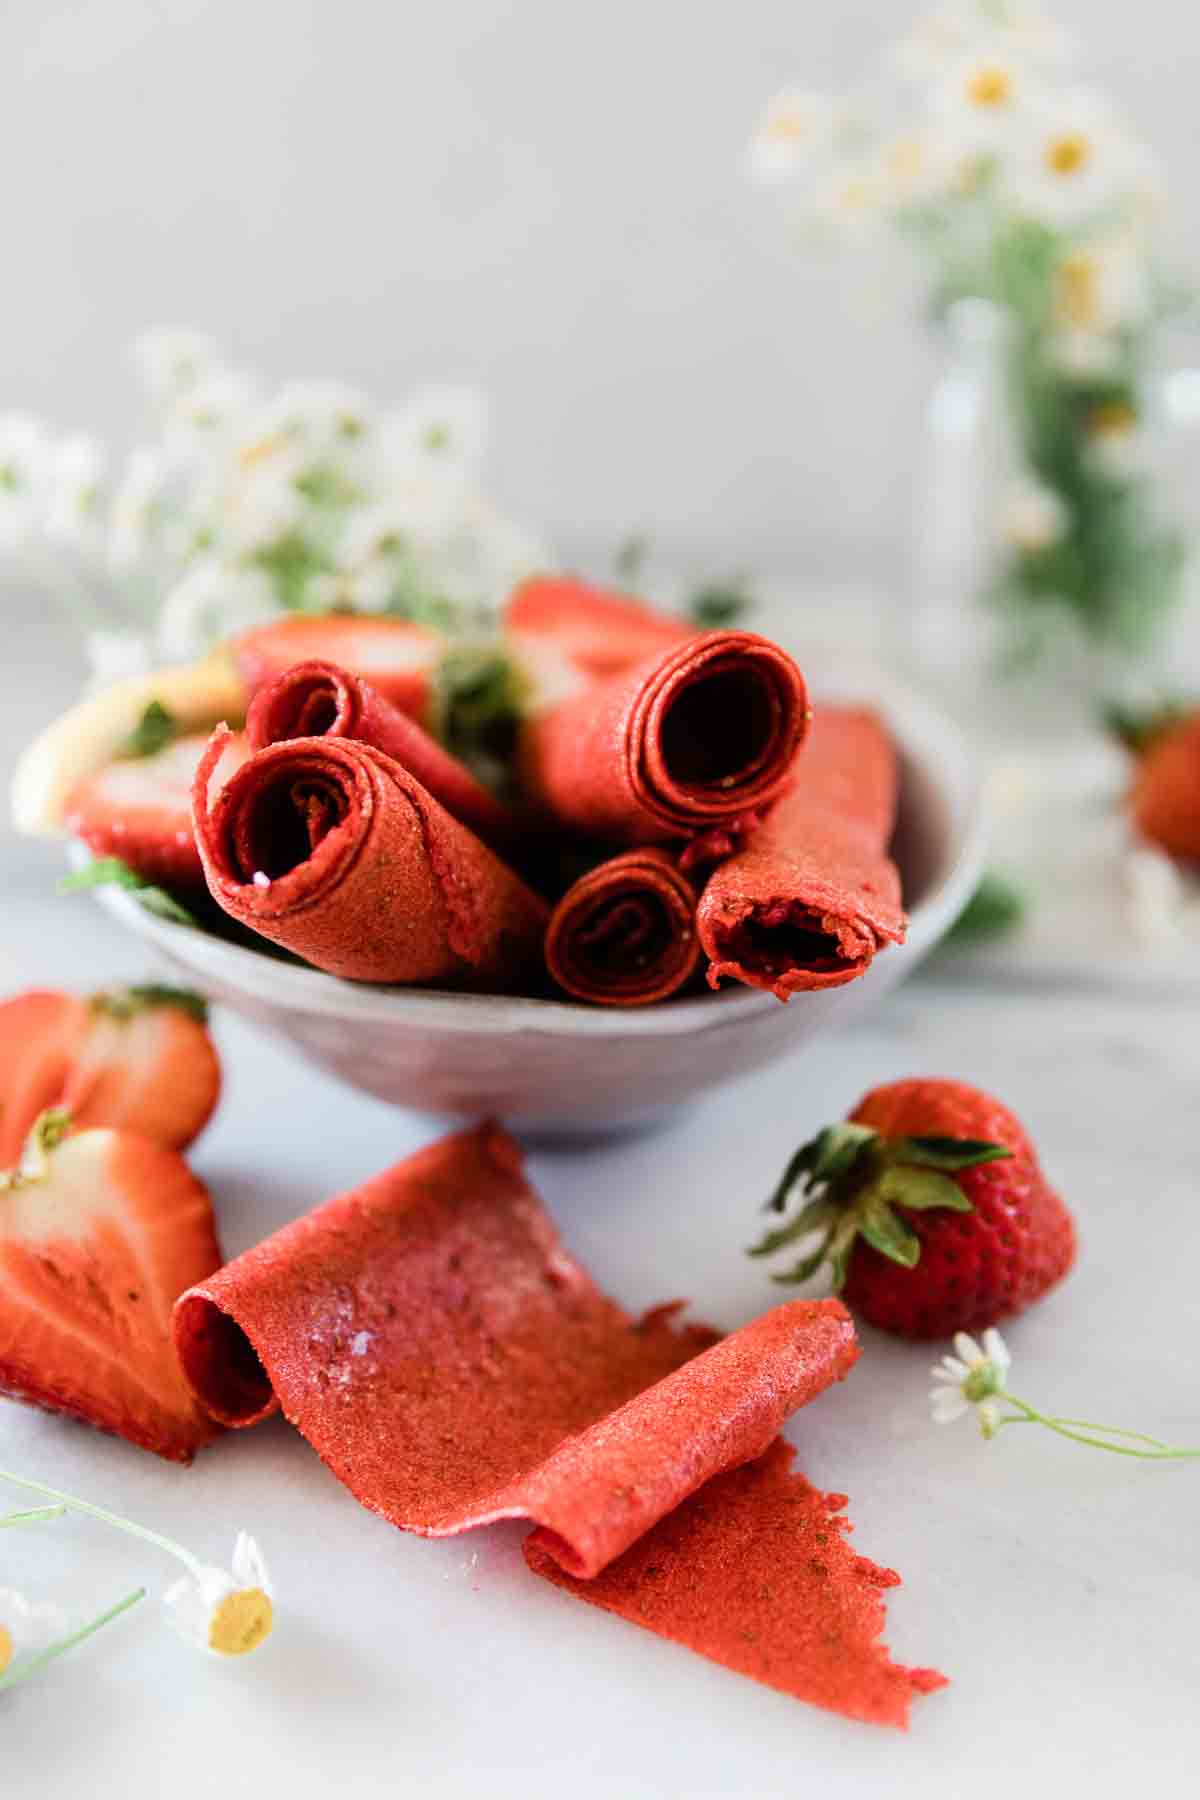 Homemade fruit roll ups rolled into rolls and setting in a bowl of strawberries.